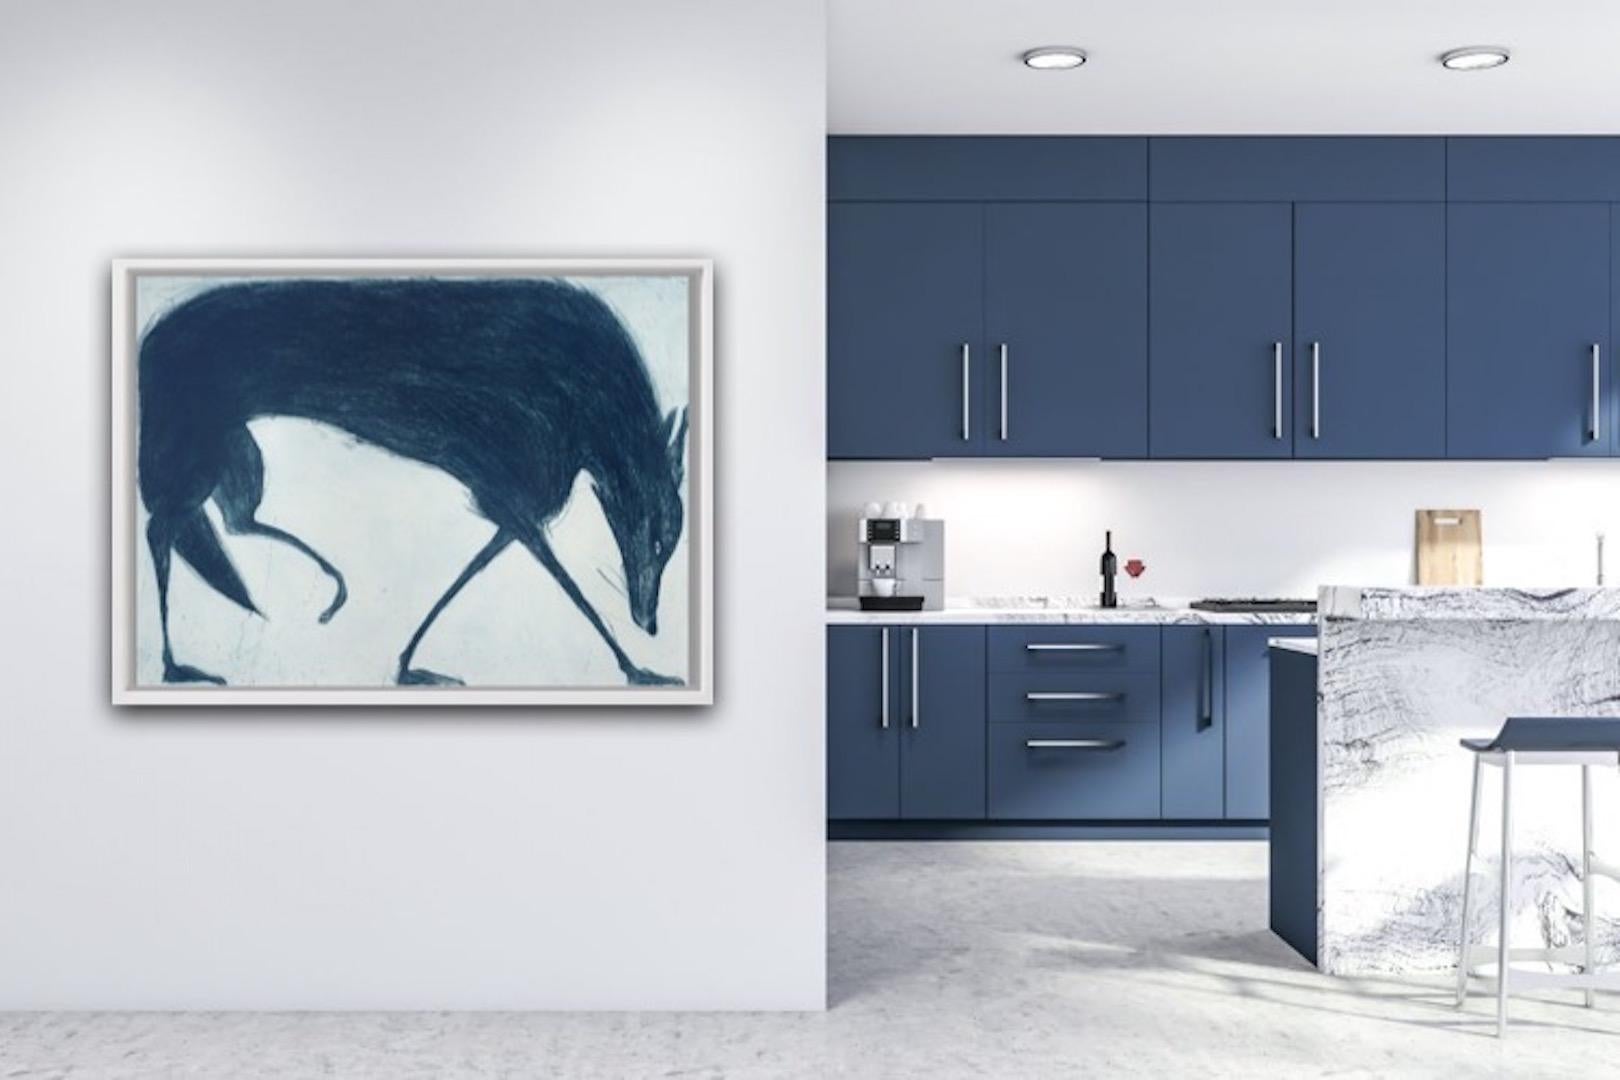 Kate Boxer
Blue Wolf
Limited Edition Drypoint
Sheet Size: H:97cm x W:120cm
Sold Unframed
(Please note that in situ images are purely an indication of how a piece may look.)

Kate Boxer's limited edition contemporary drypoint print 'Blue Wolf'